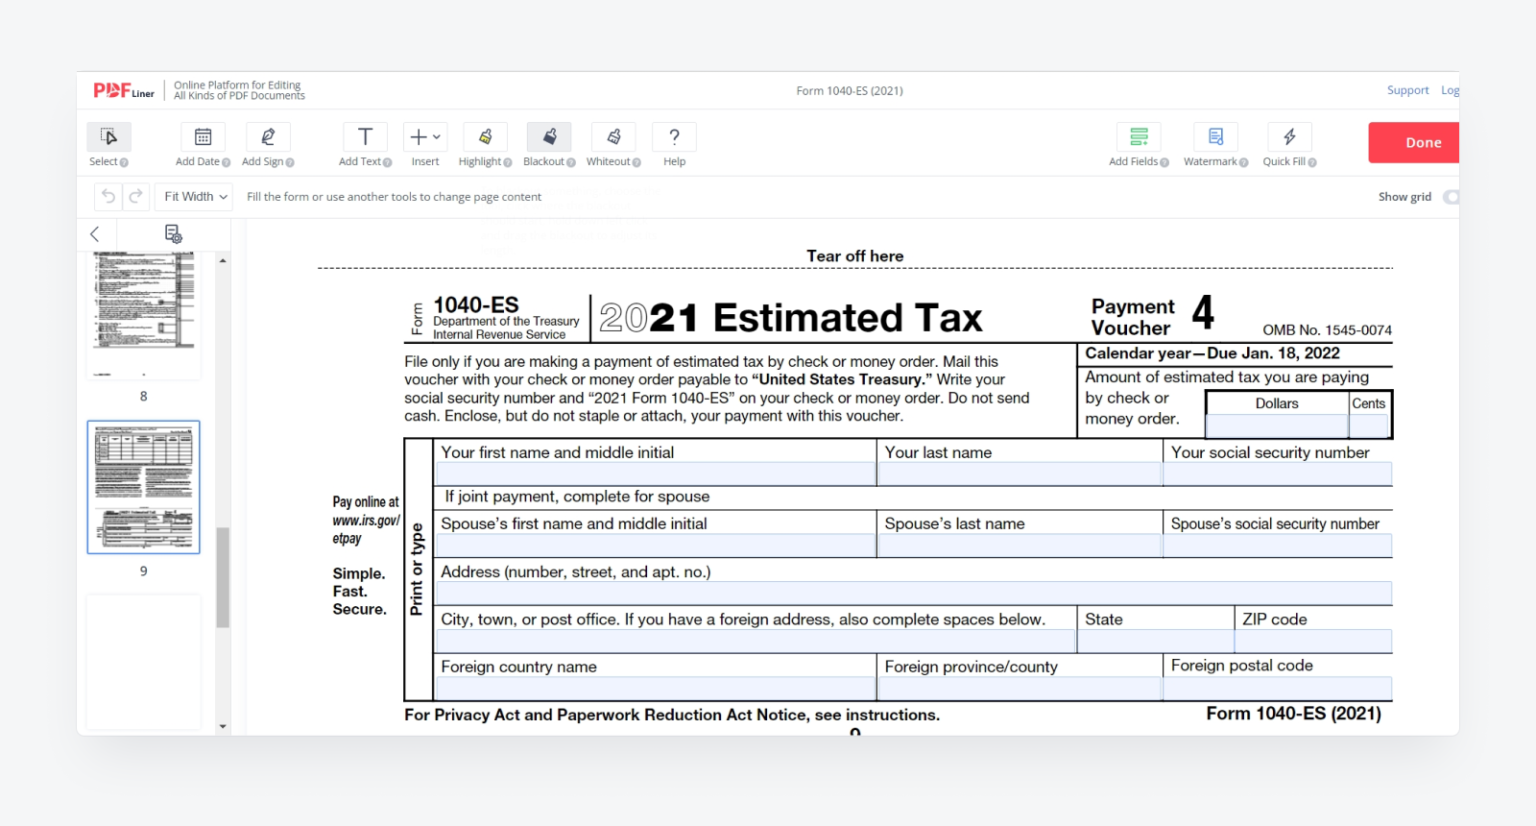 How to Pay Federal Estimated Taxes Online Using IRS Form 1040ES